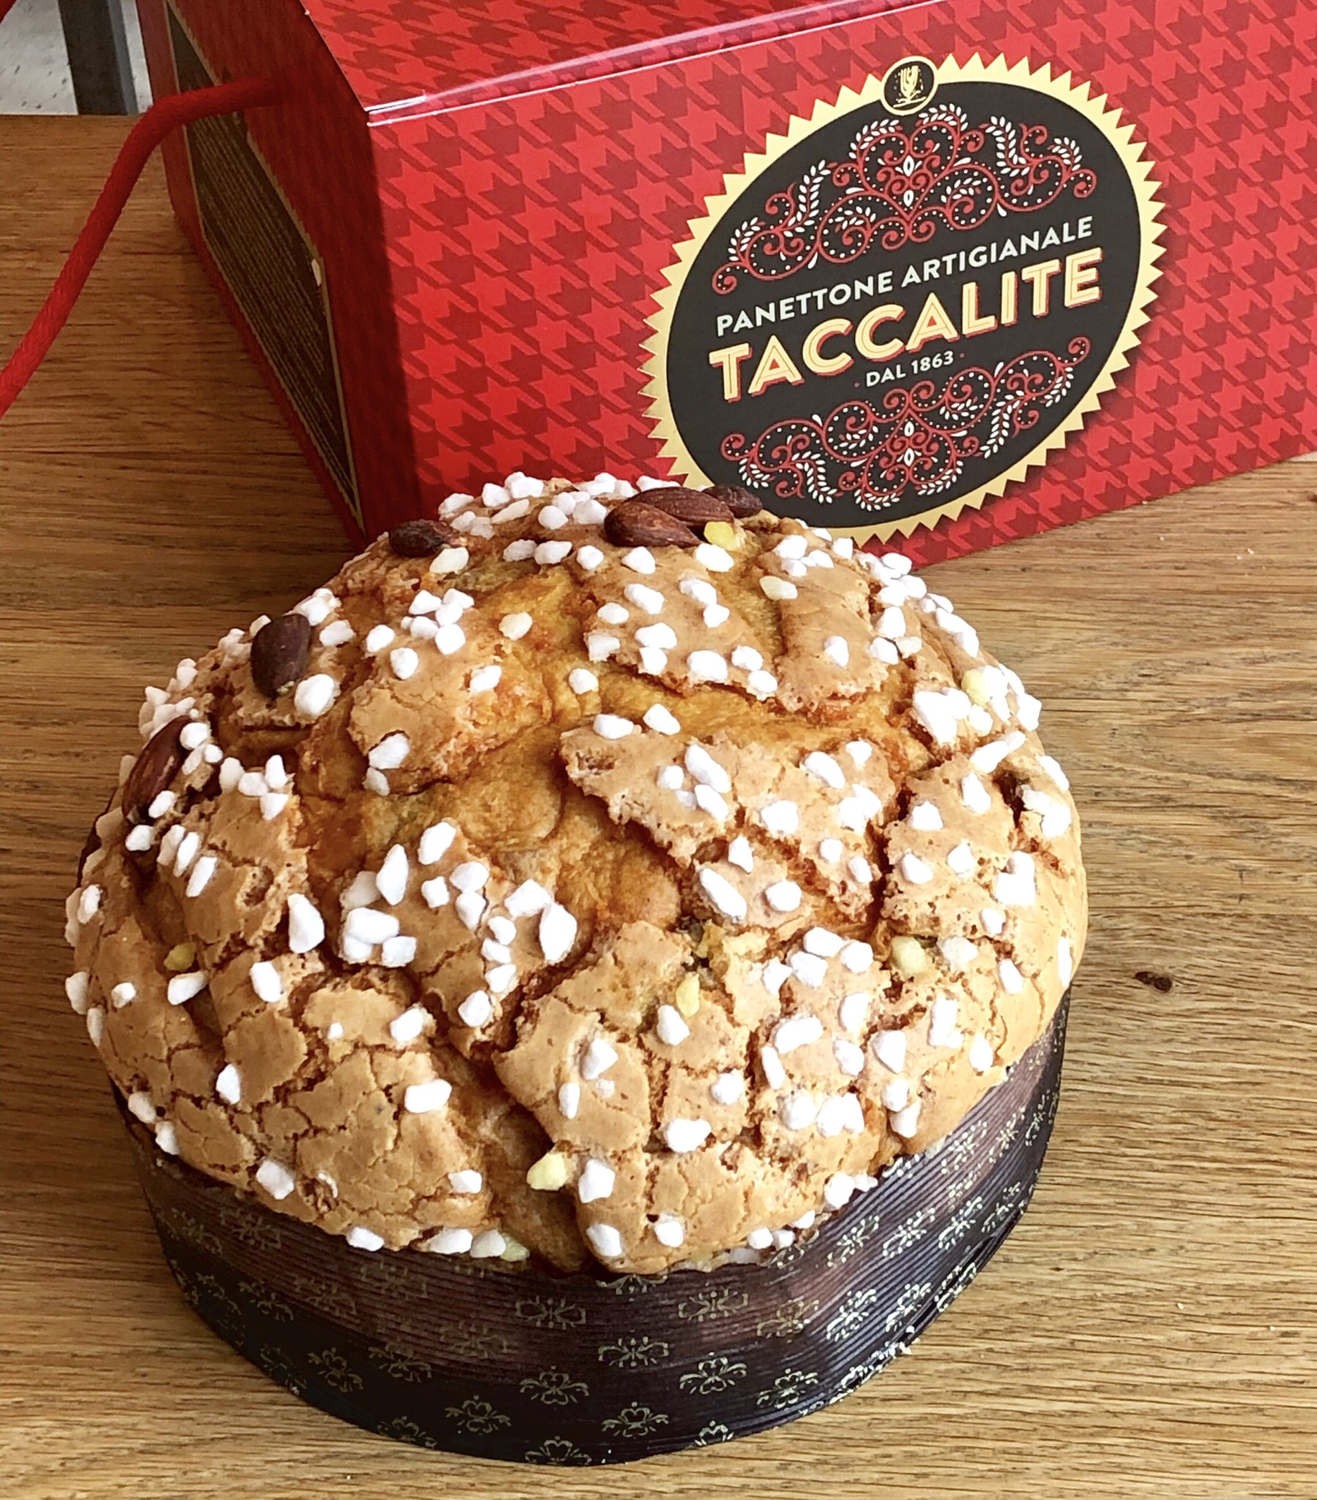 TRADITIONAL PANETTONE - FORNO TACCALITE